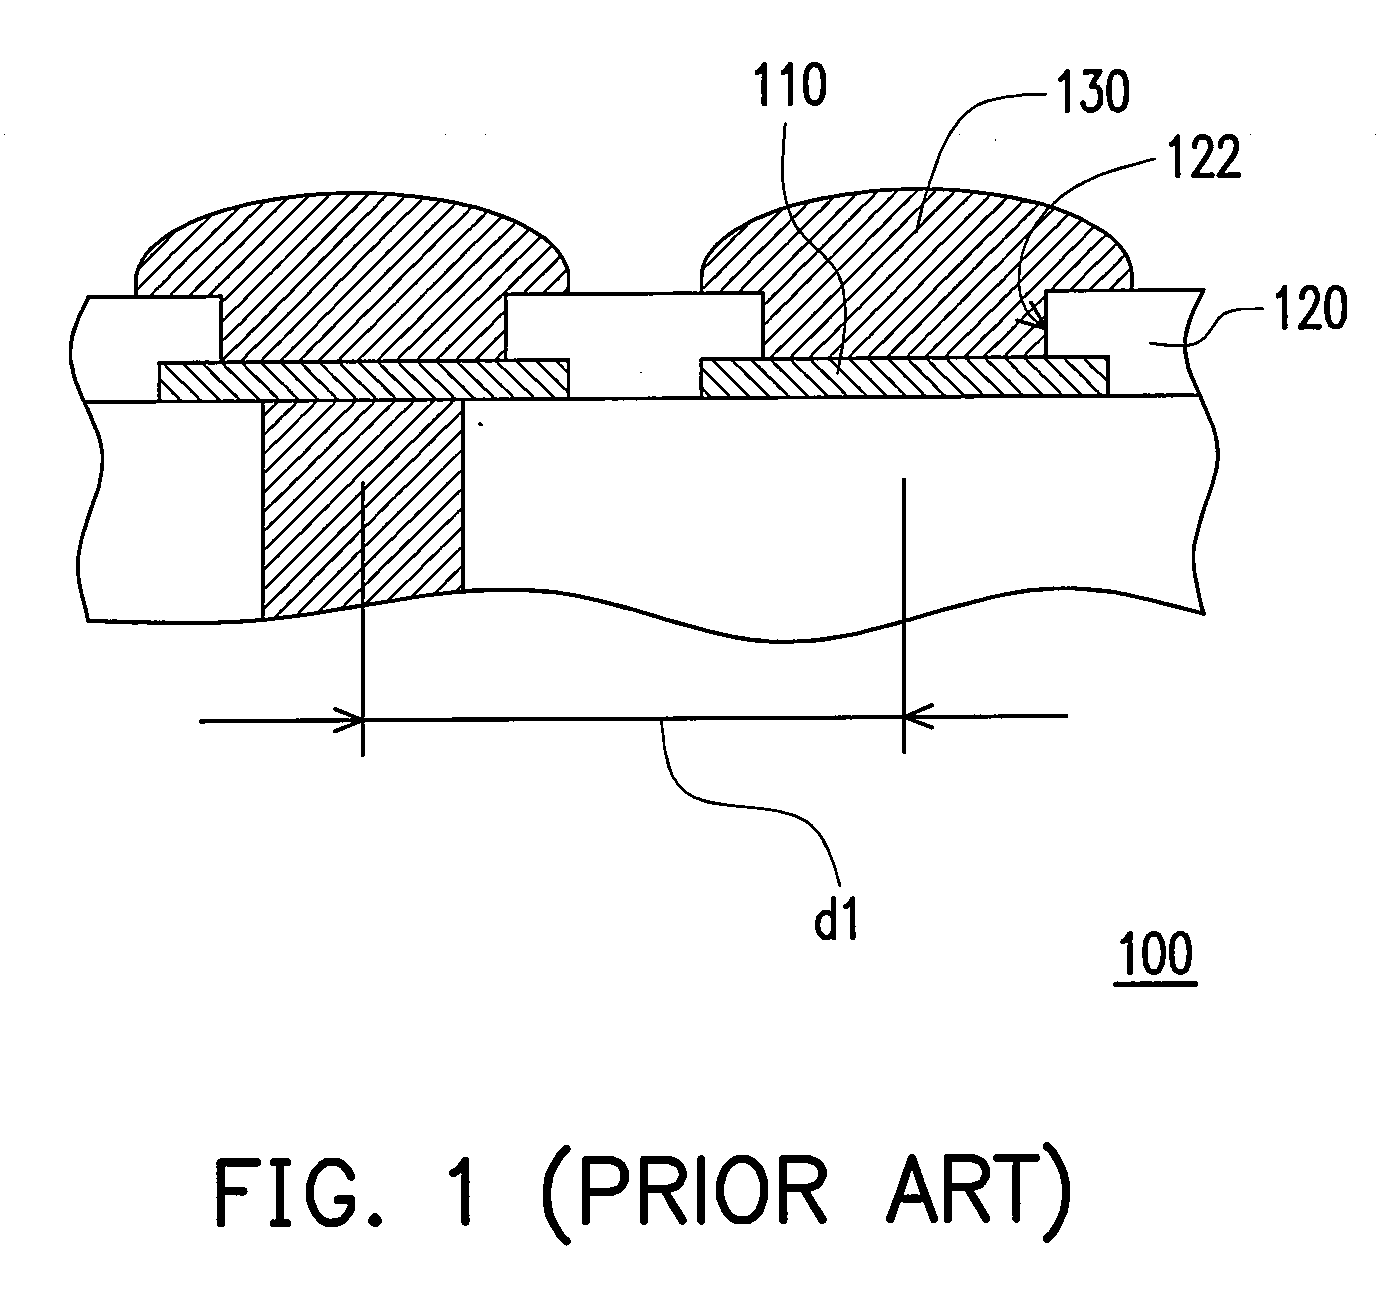 Package substrate, method of fabricating the same and chip package